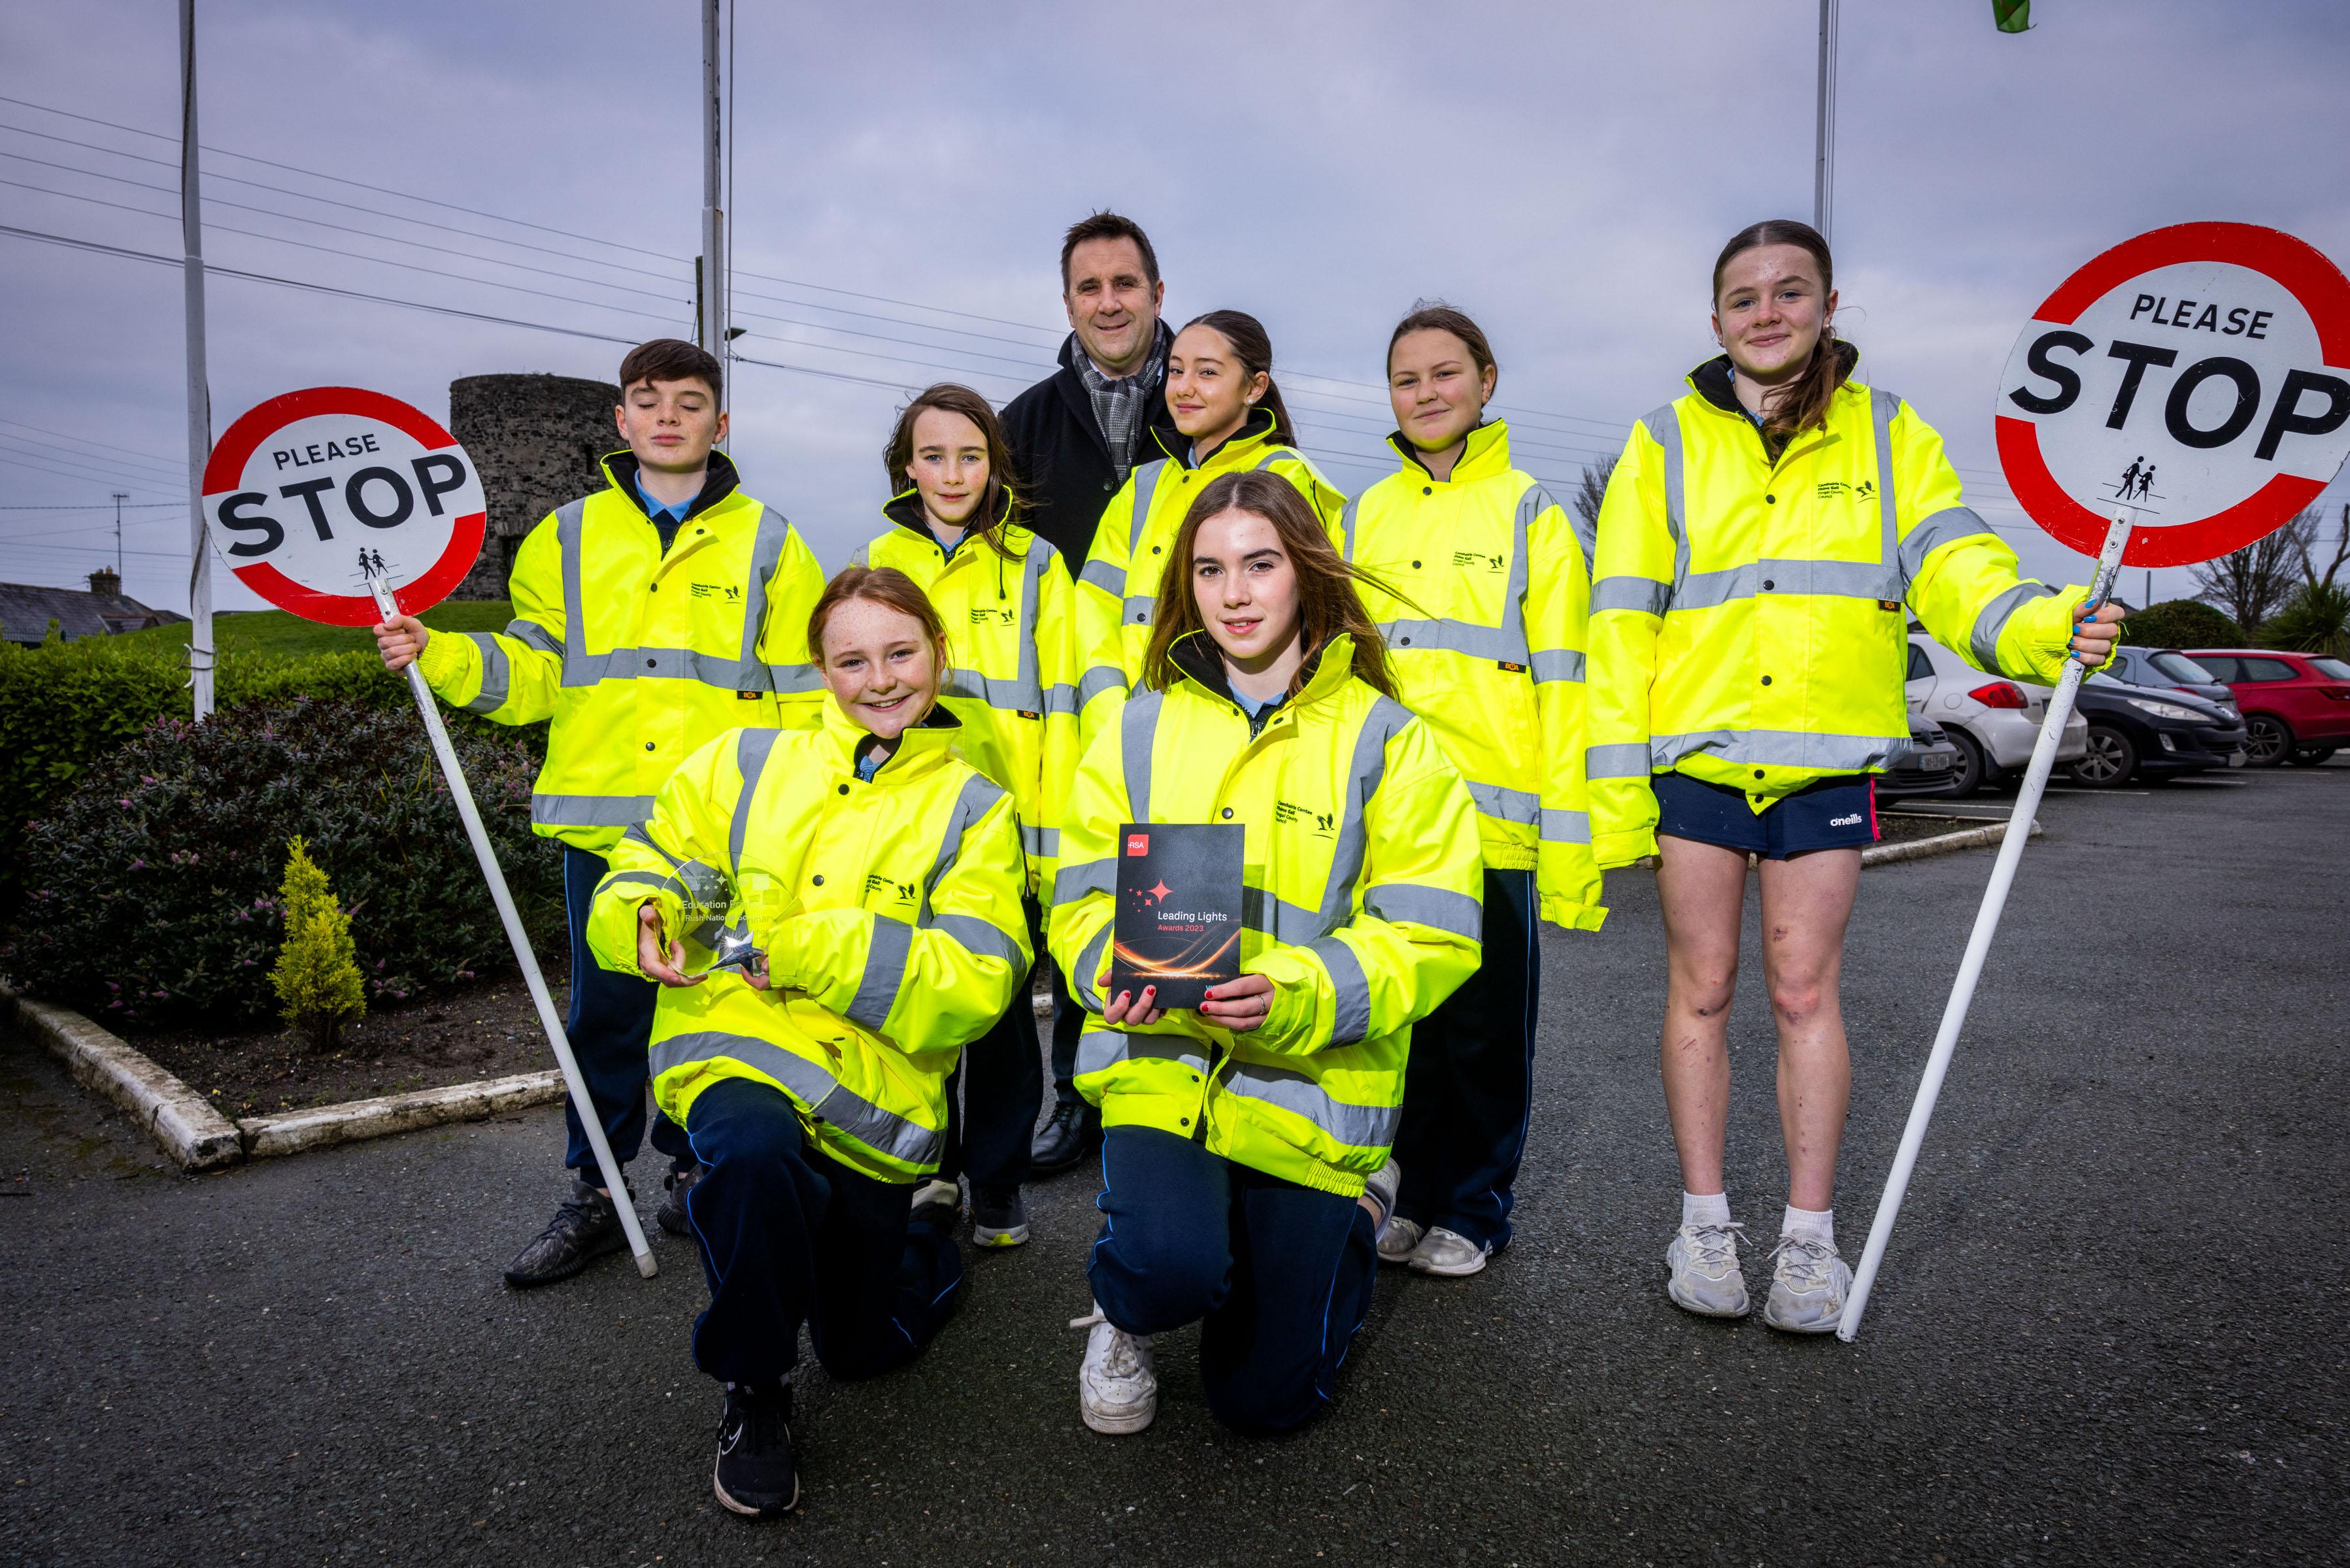 Group of children in yellow hi-vis jackets pose with school principal while holding award